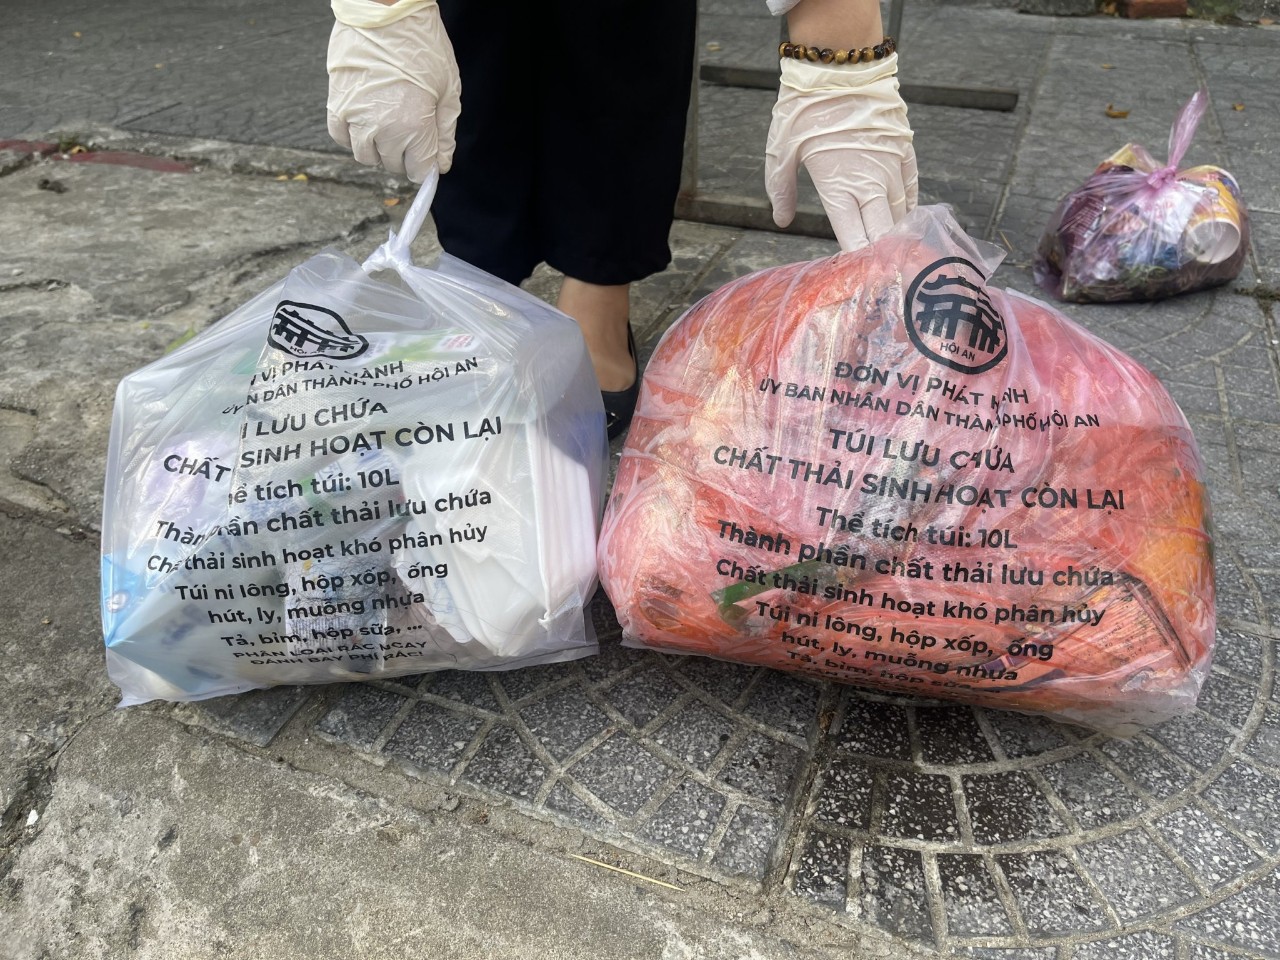 Authorised trash bags were used by households in Cam Nam